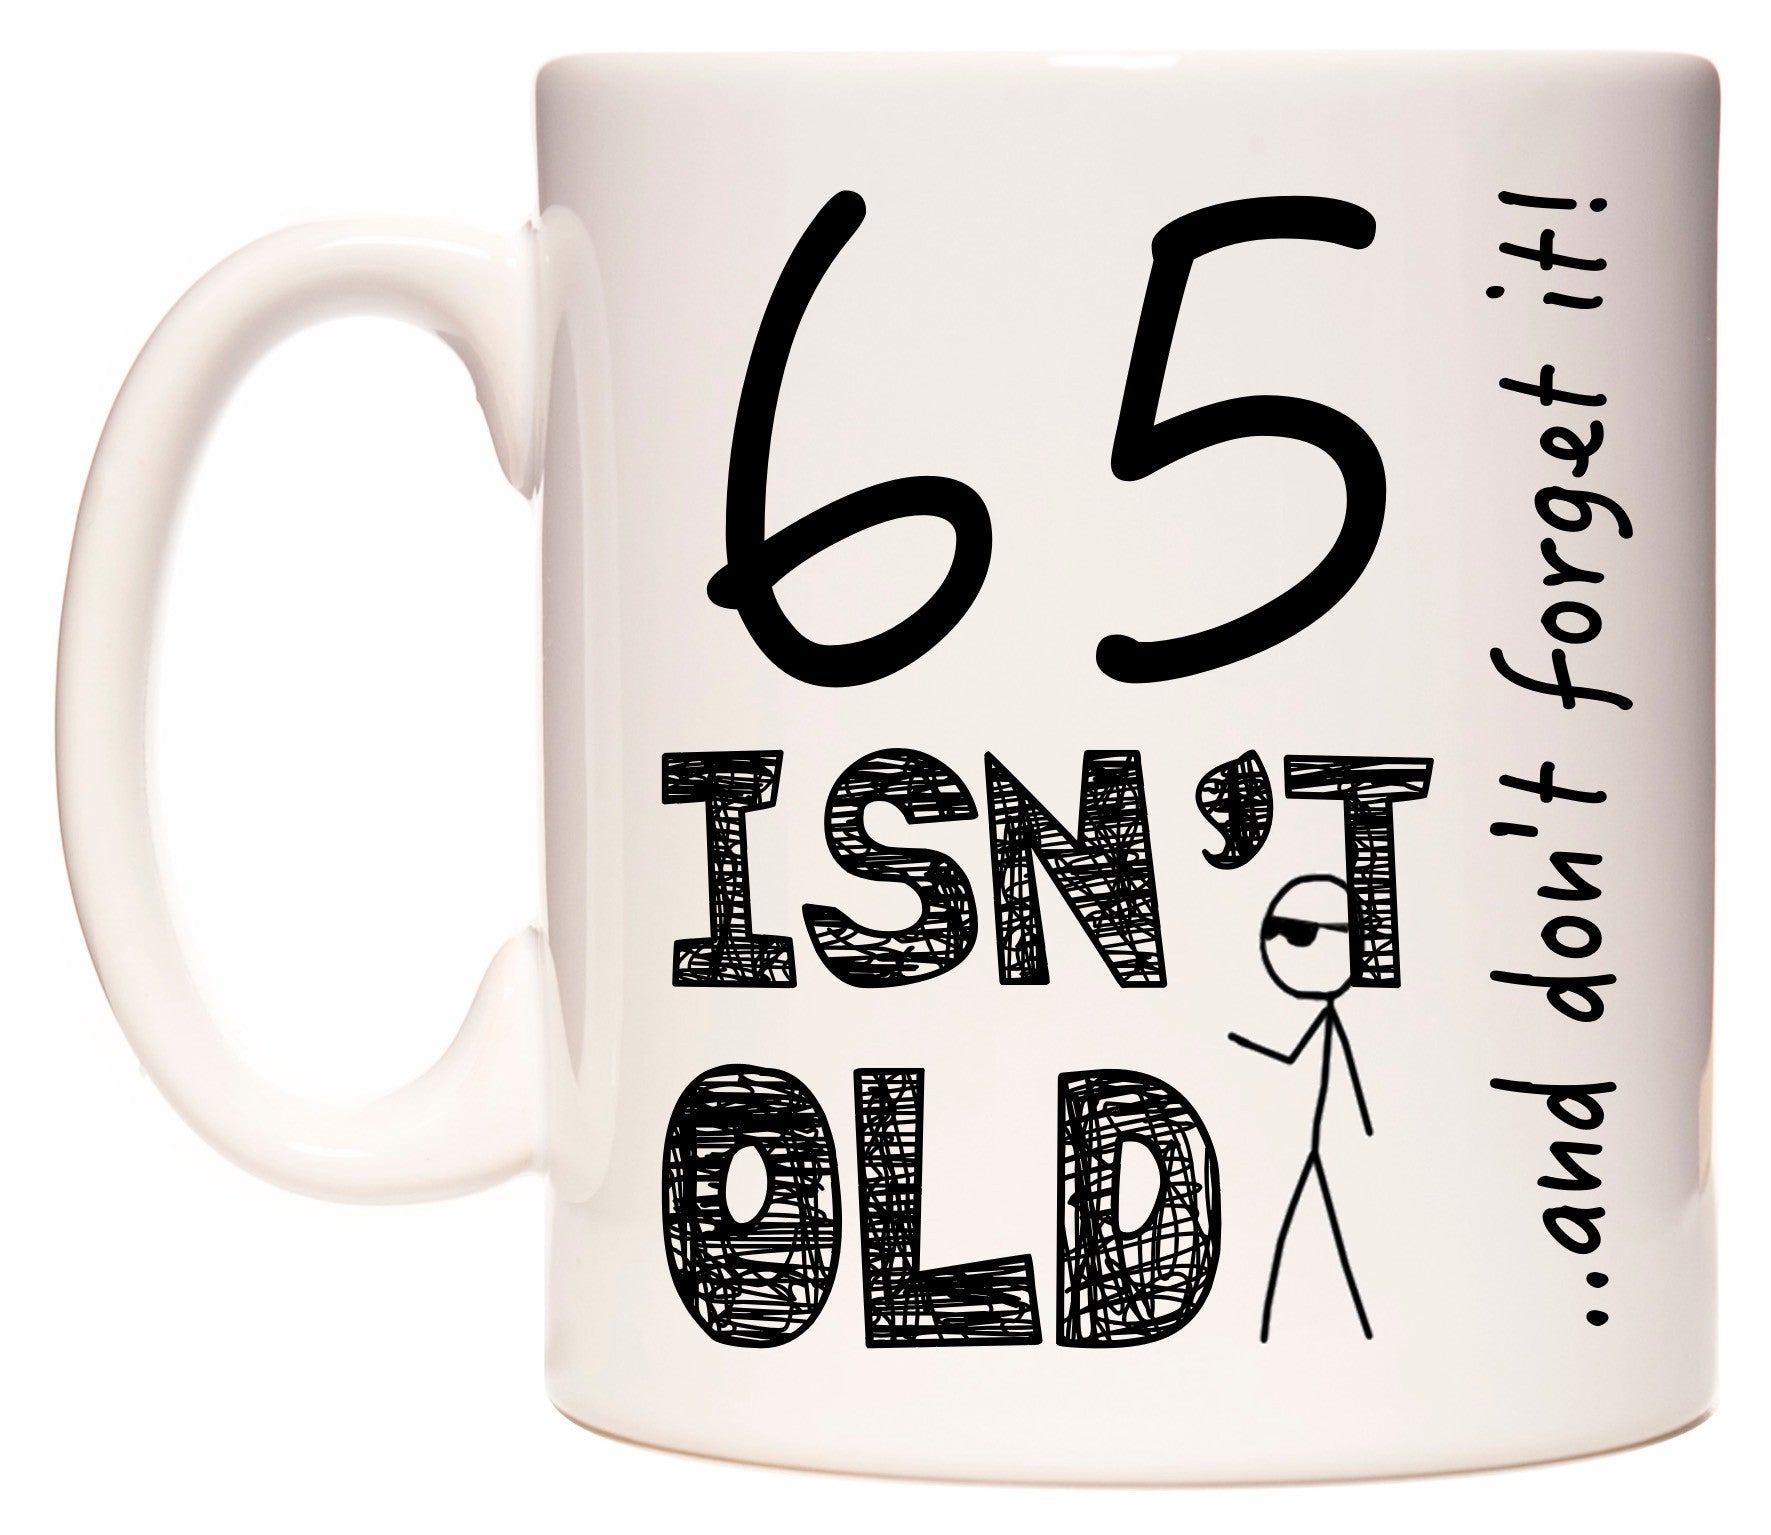 This mug features 65 Isn't Old